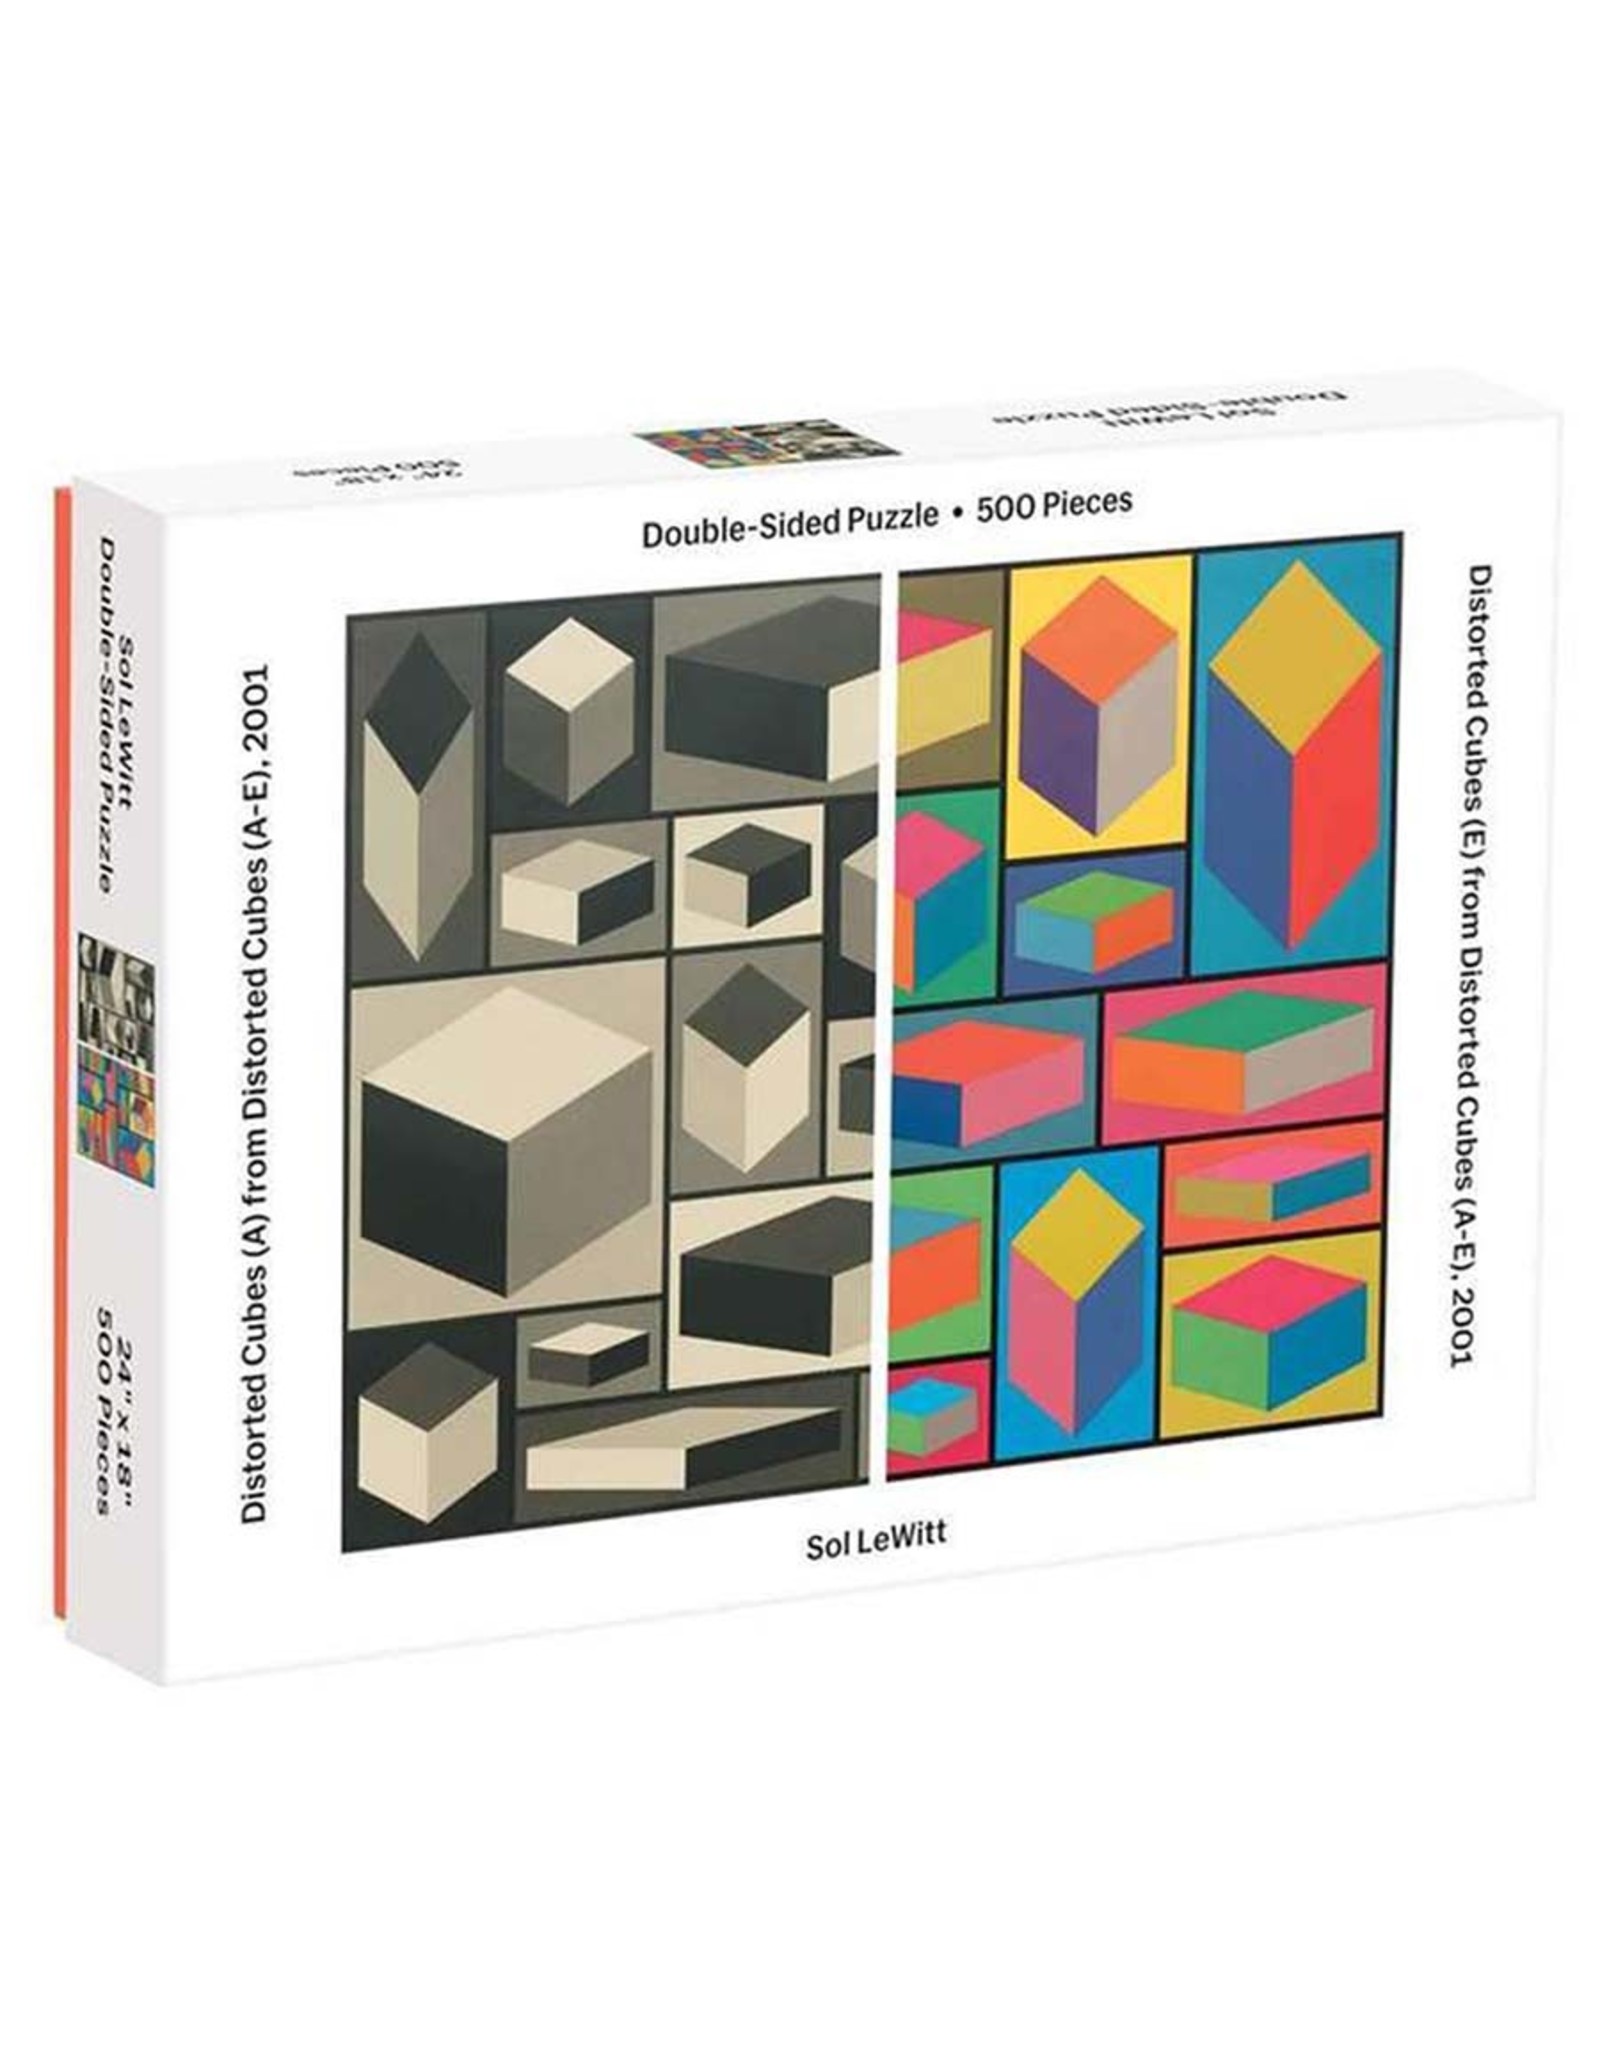 Distorted Cubes Double-Sided Puzzle